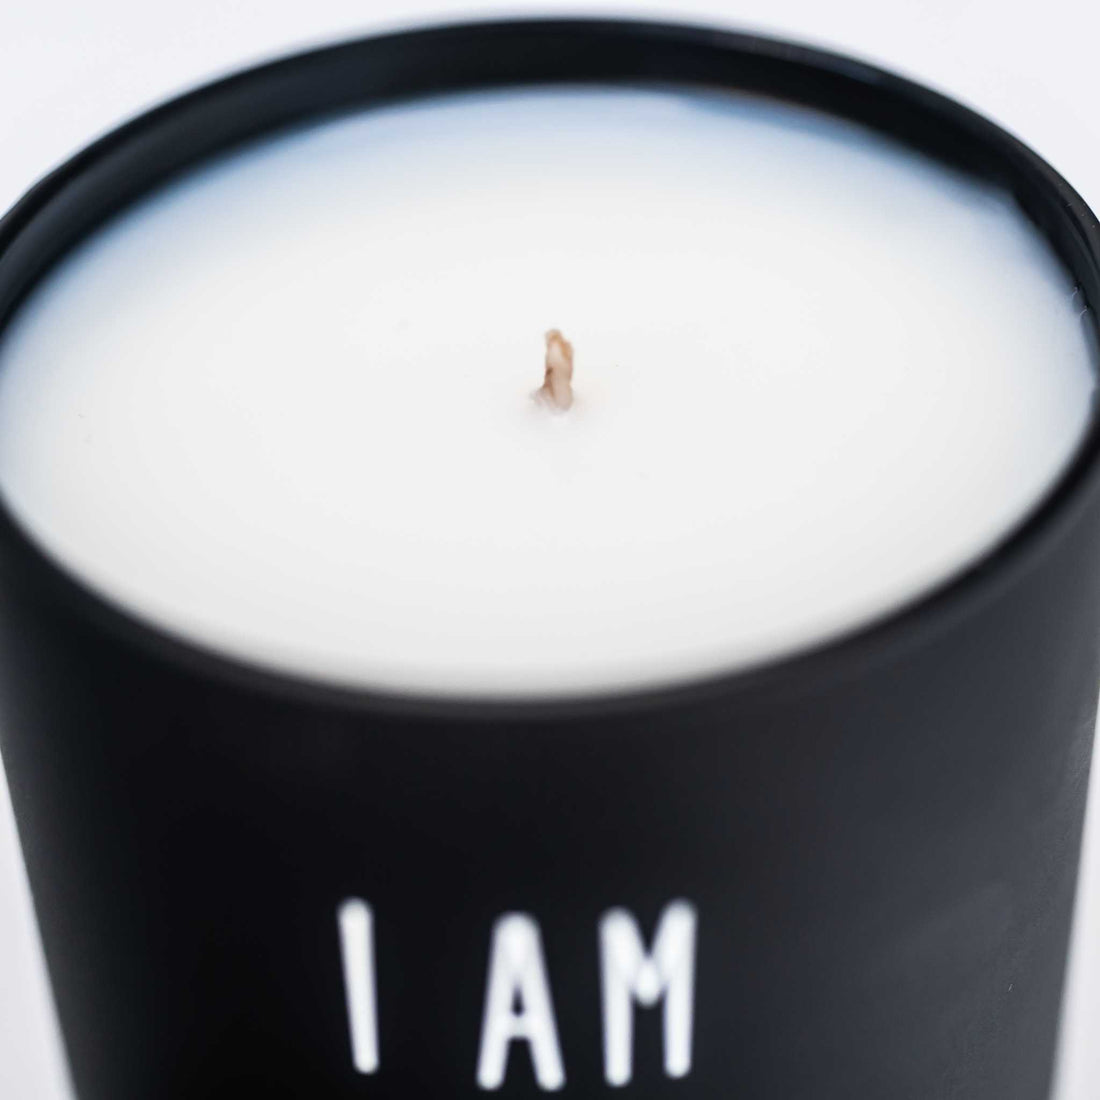 I AM Magical - Affirmation Soy Candle I AM - Affirmation Candles House of Intuition 